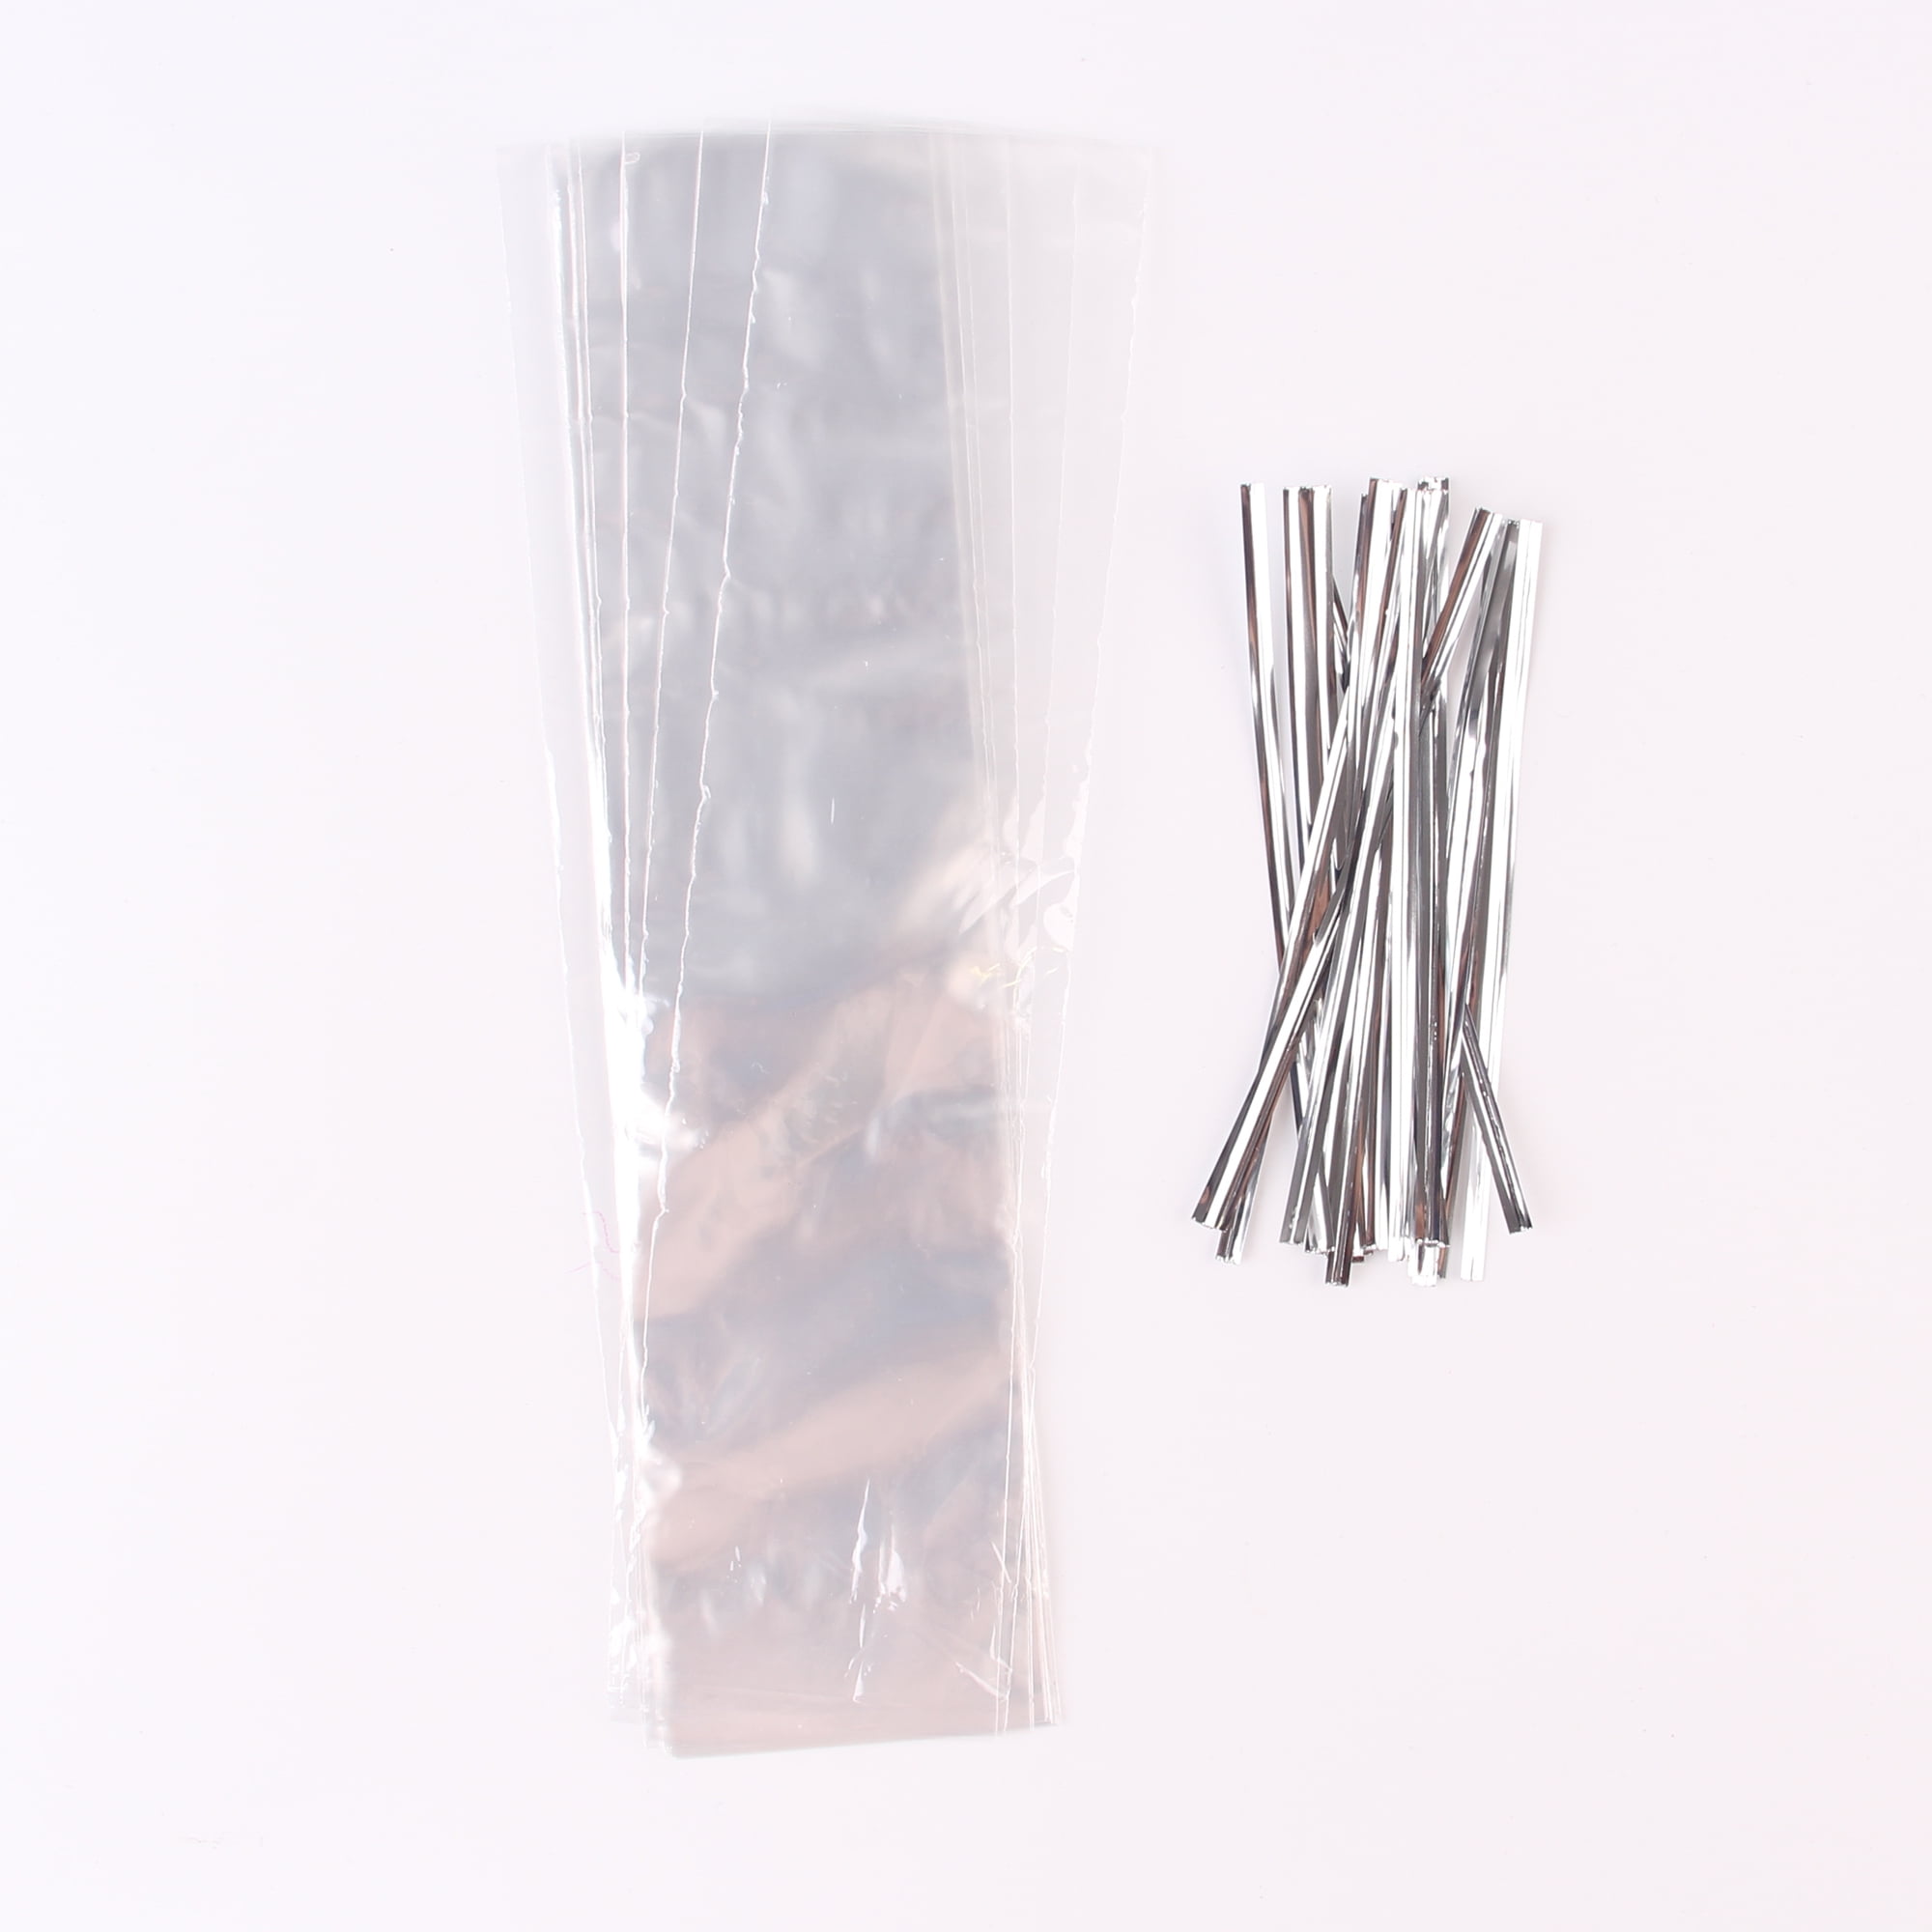 Lot of 100 Large Cello Pretzel Rod Bags 4 x 11 Clear NEW Beef Jerky Candy Treat 